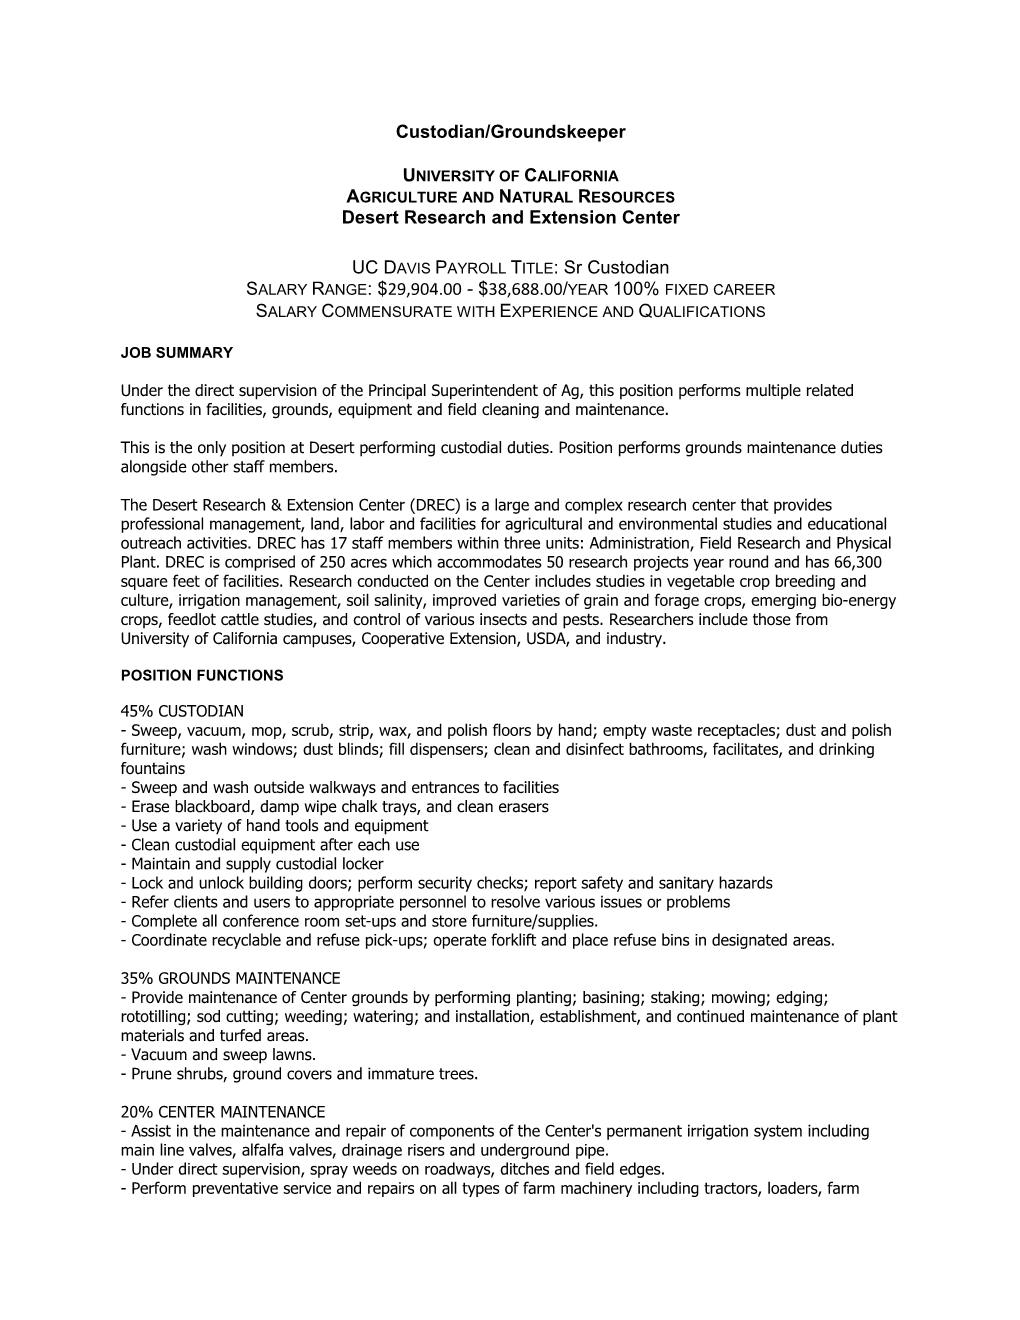 Analyst Iv, Contracts and Grants, Agriculture and Natural Resources